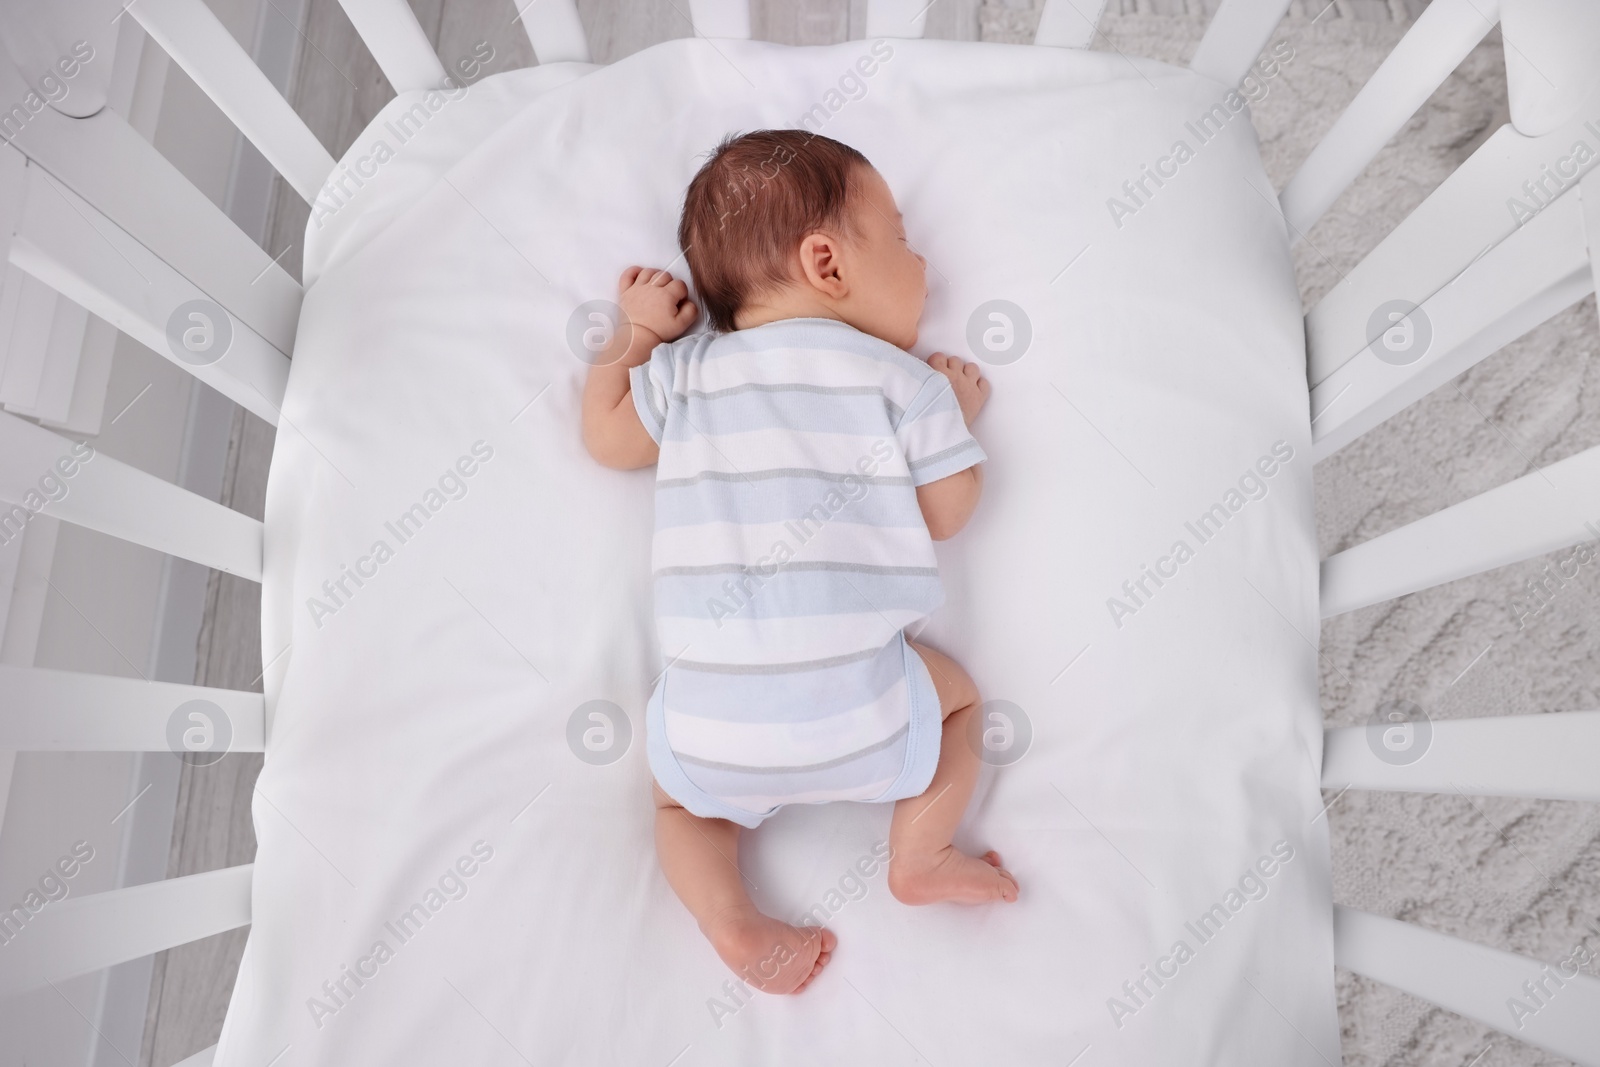 Photo of Cute newborn baby sleeping in crib at home, top view. Bedtime